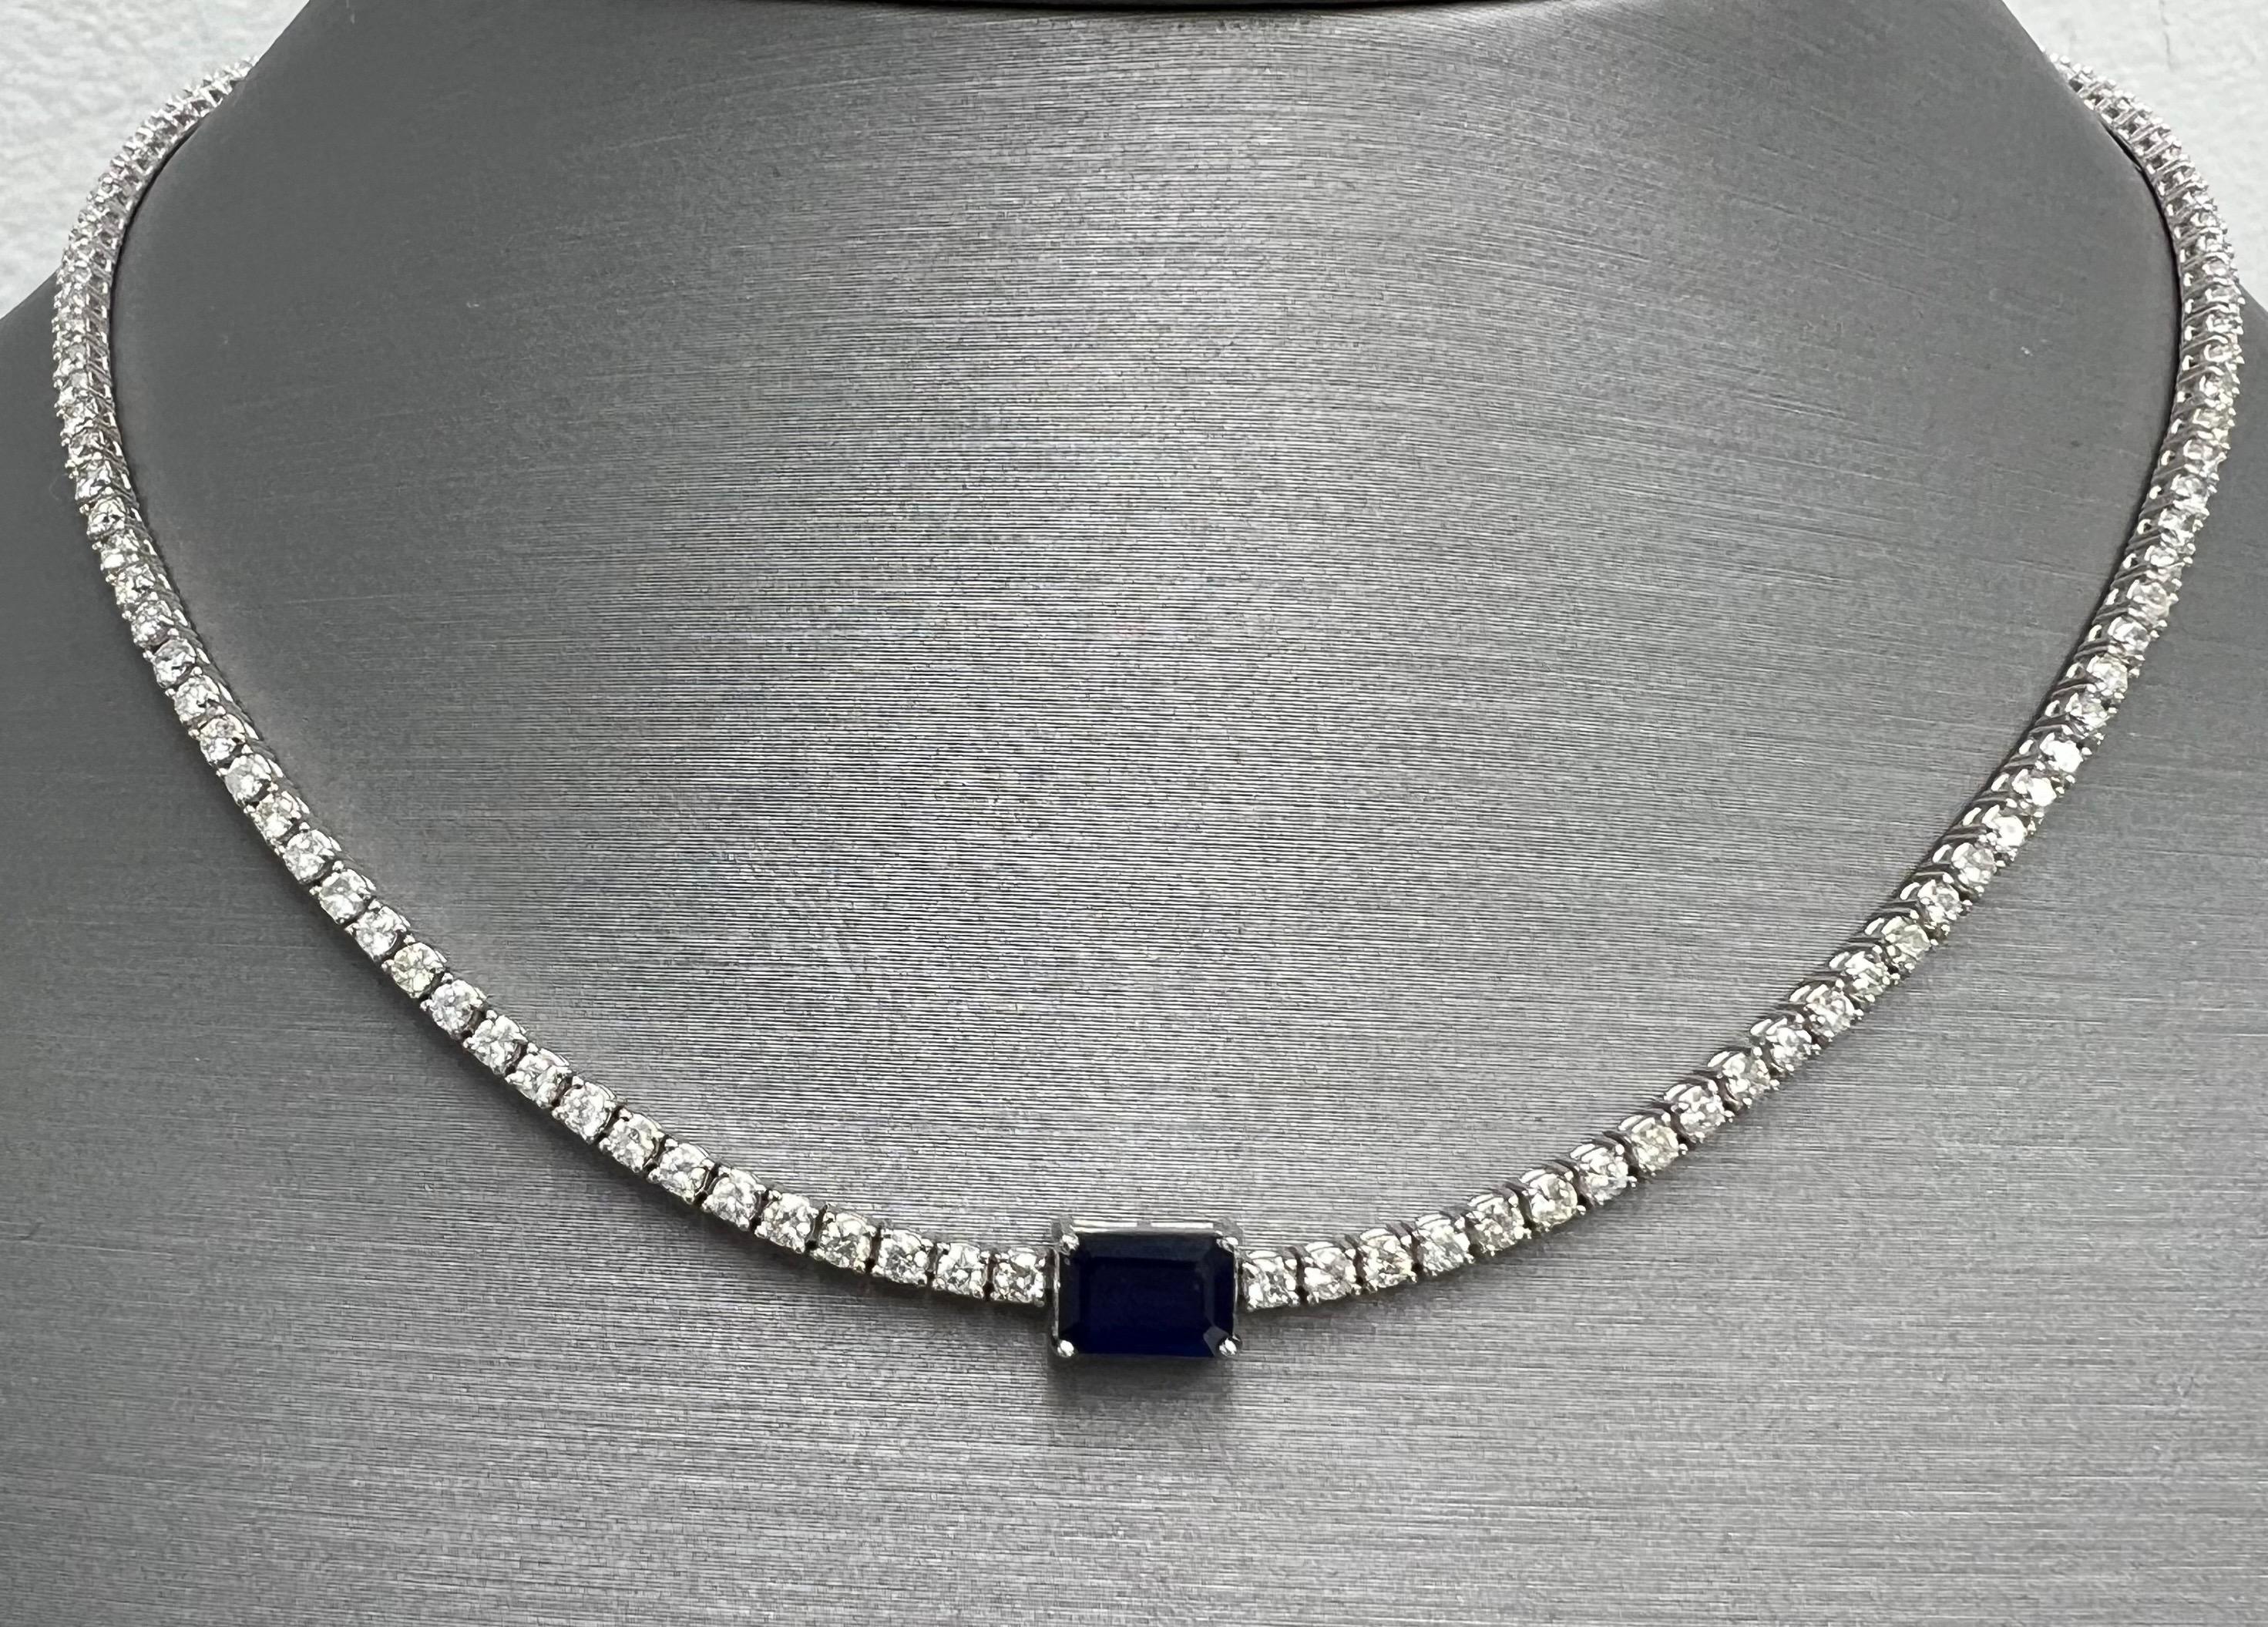 Diamond Choker Necklace in 14k white with 1.02ct of Natural Emerald Cut Sapphire
3.41 Total Carat Weight of Natural Full Cut Diamonds
1.02 Total Carat Weight of Natural Emerald Cut Blue Sapphire
14k White Gold
Adjustable Necklace Size: from 13